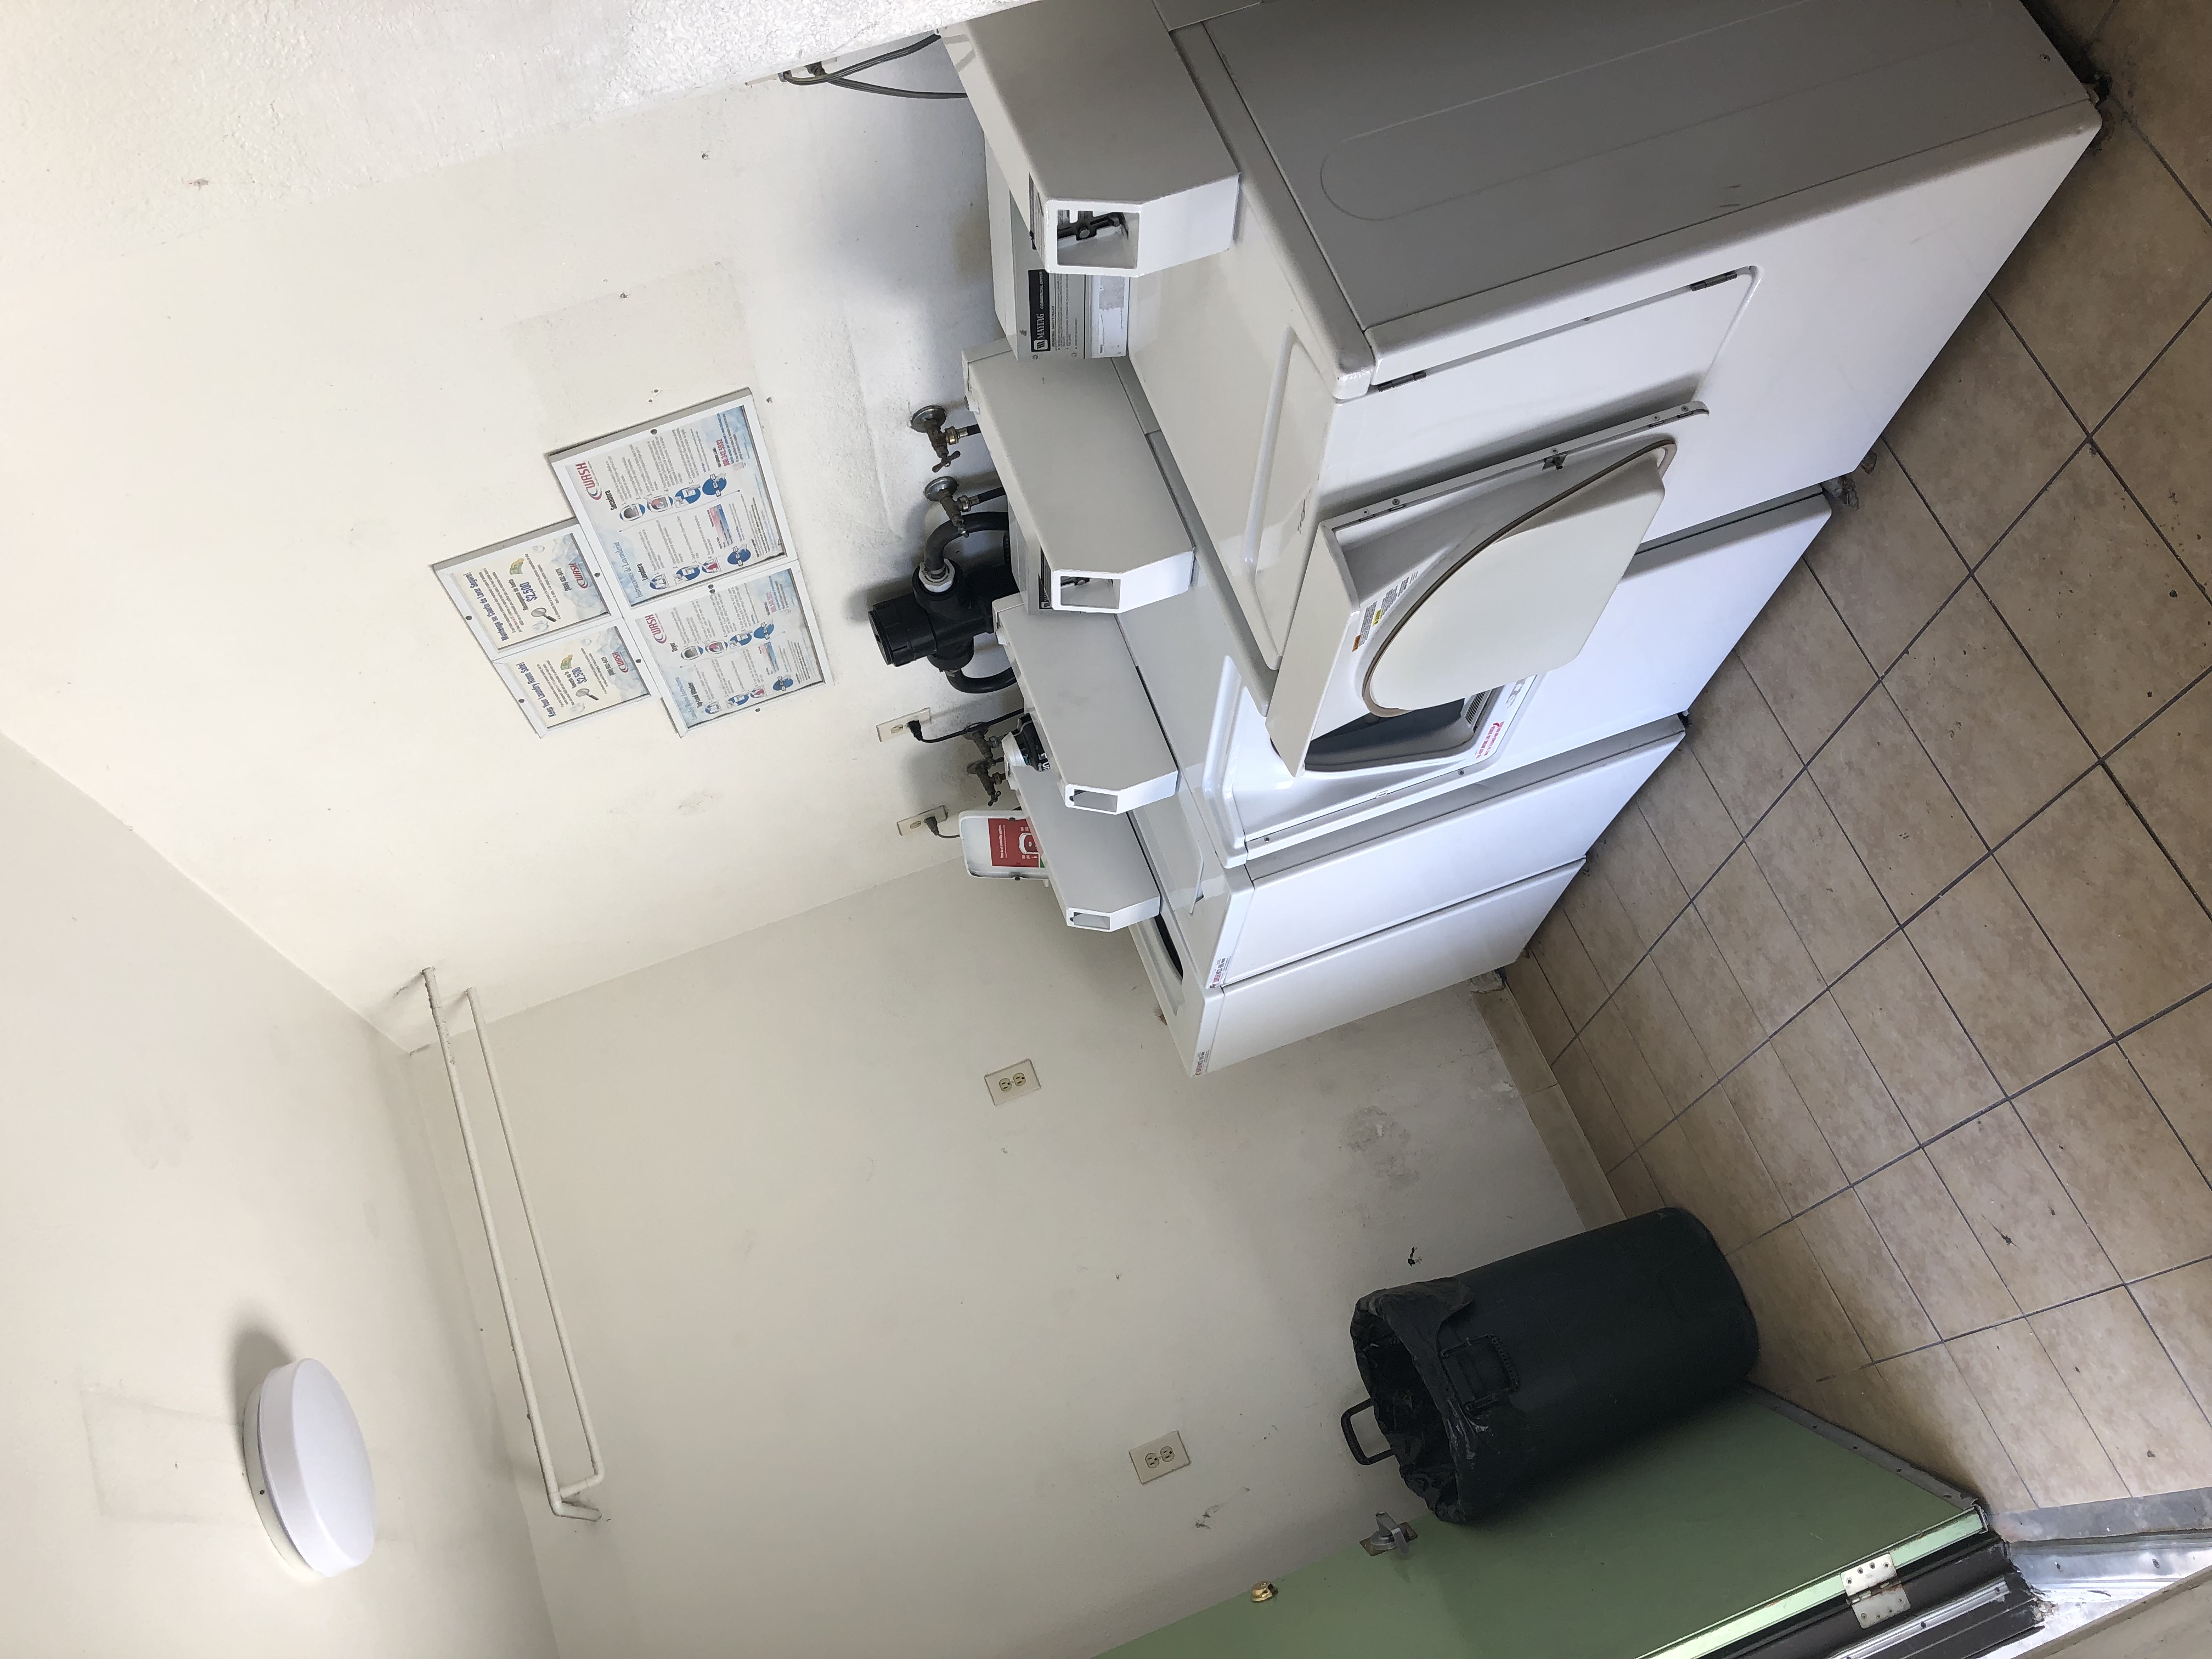 Right side view of a laundry, two white washers, two white dryers, beige flooring, big trash can with plastic bag, instruction signs on the wall.